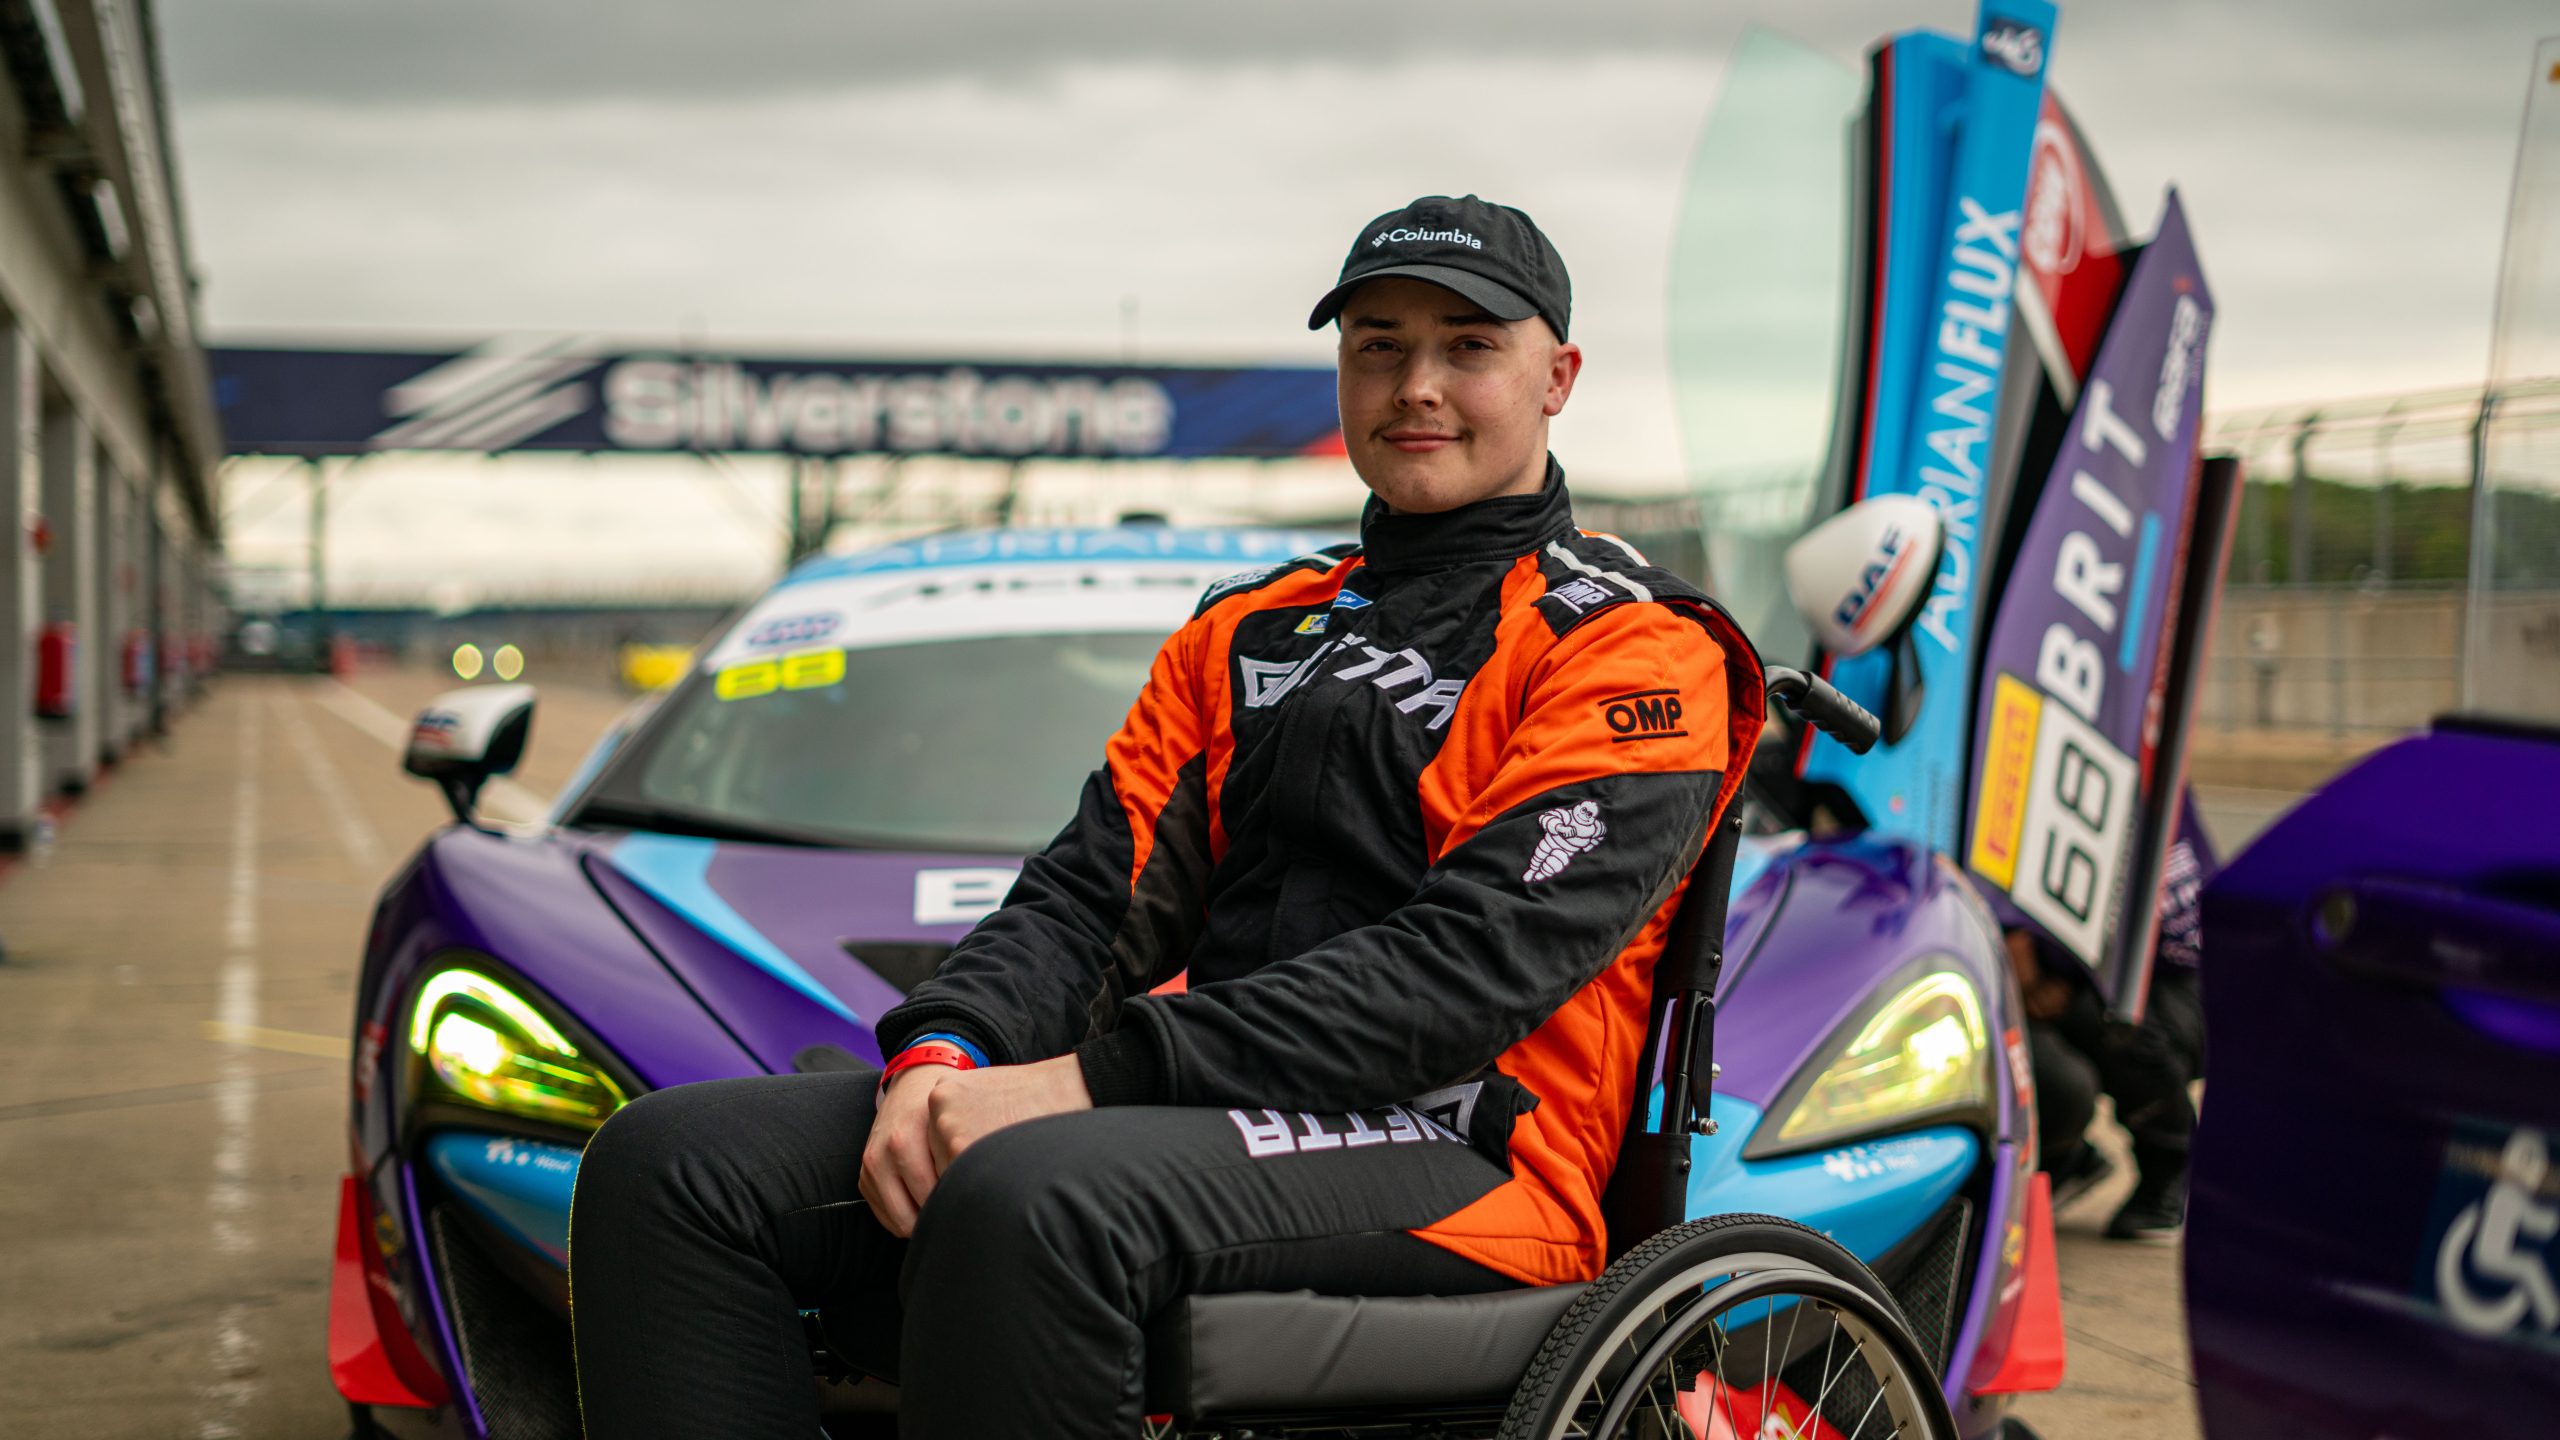 Teen racing star gets back on track after cancer diagnosis